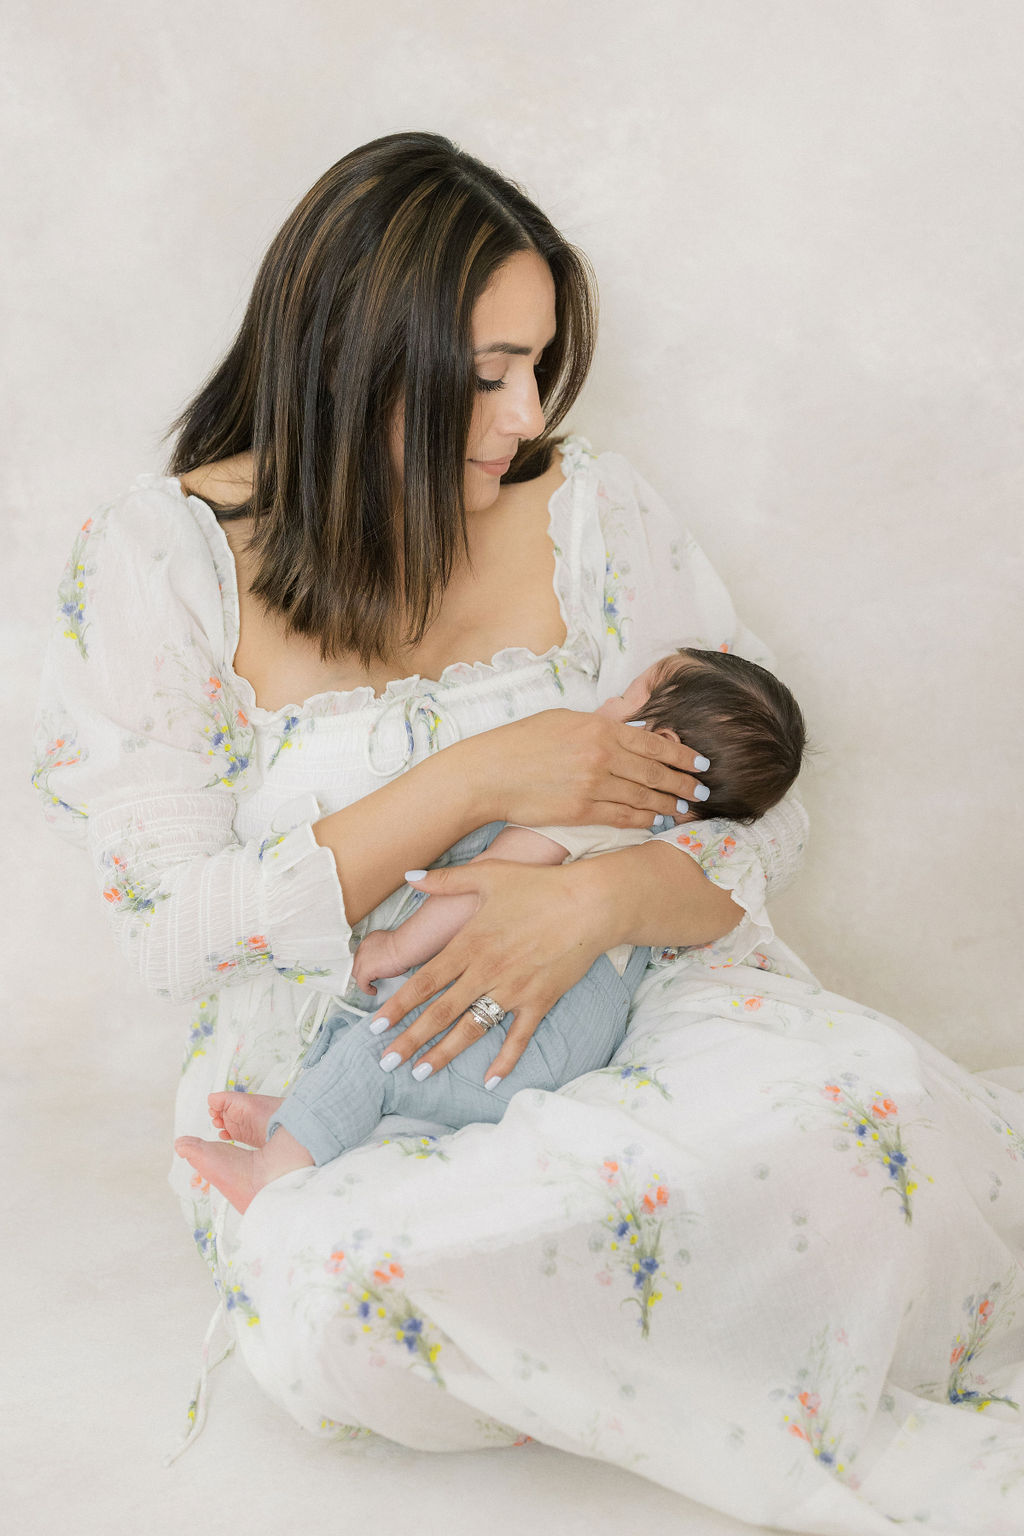 A new mother sits on the floor of a studio in a white dress with floral patterns holding her newborn baby boy in her lap laid back lactation